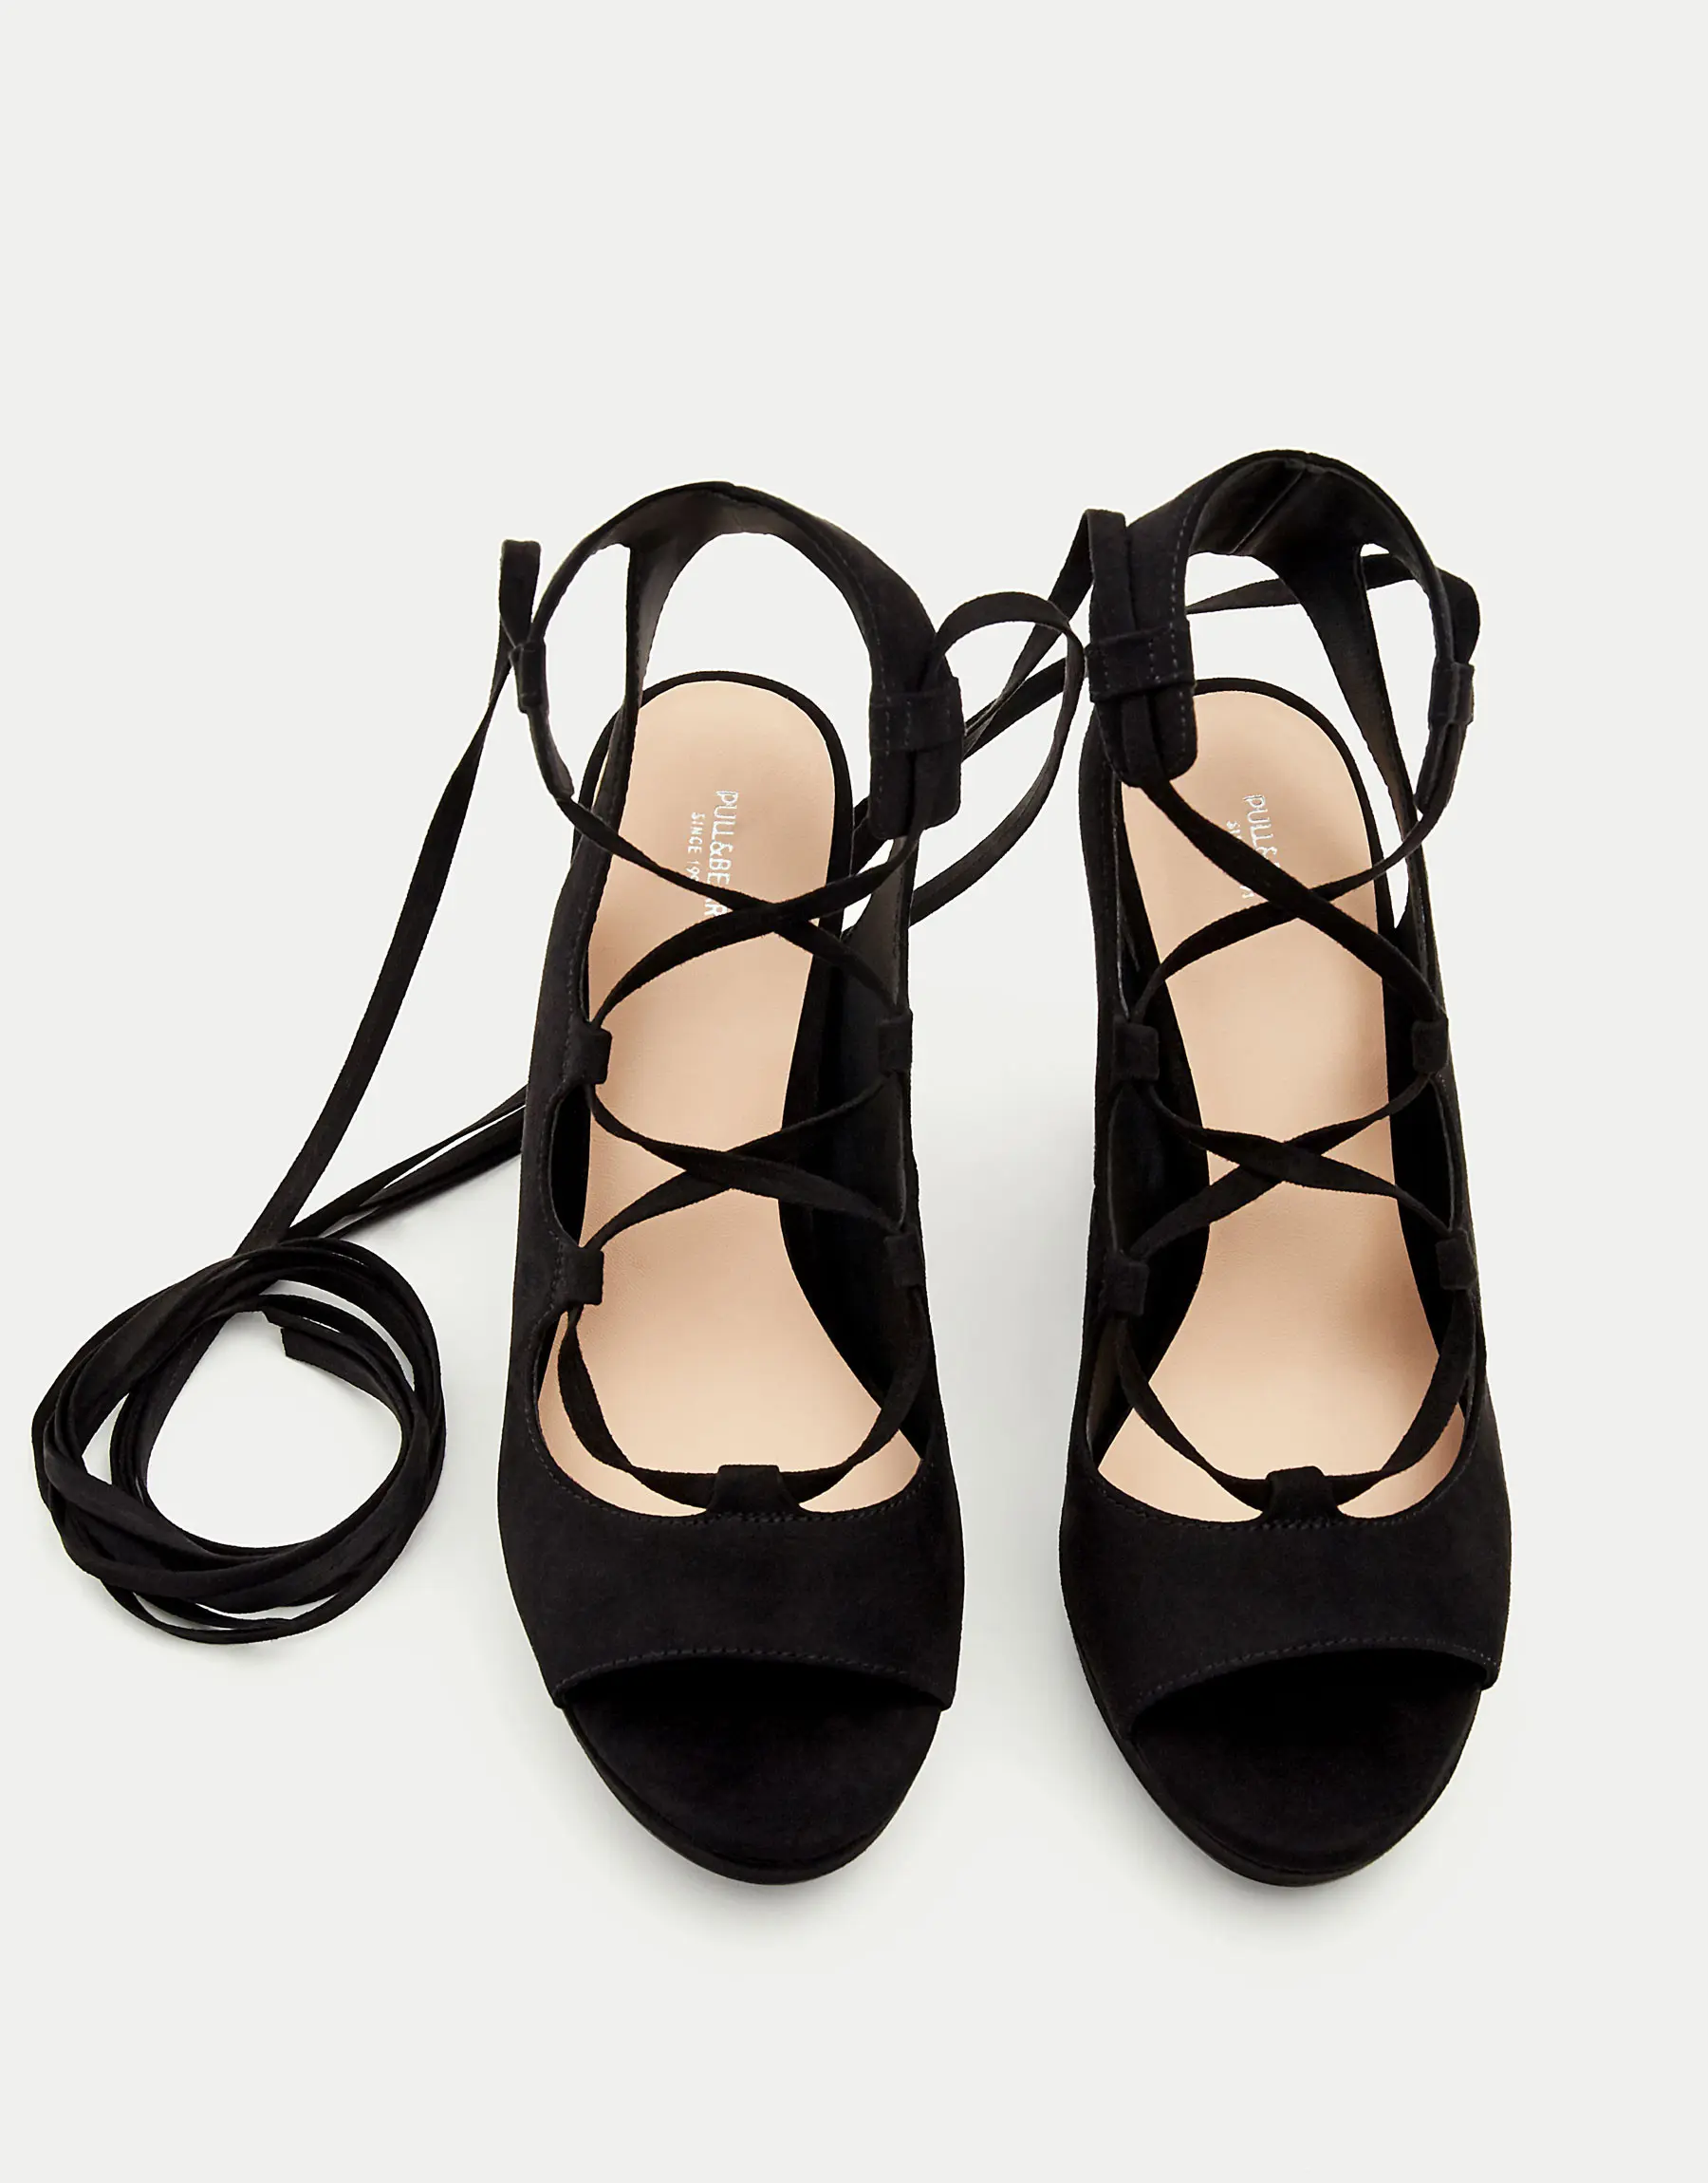 Lace-up high heel sandals, Pull&Bear.